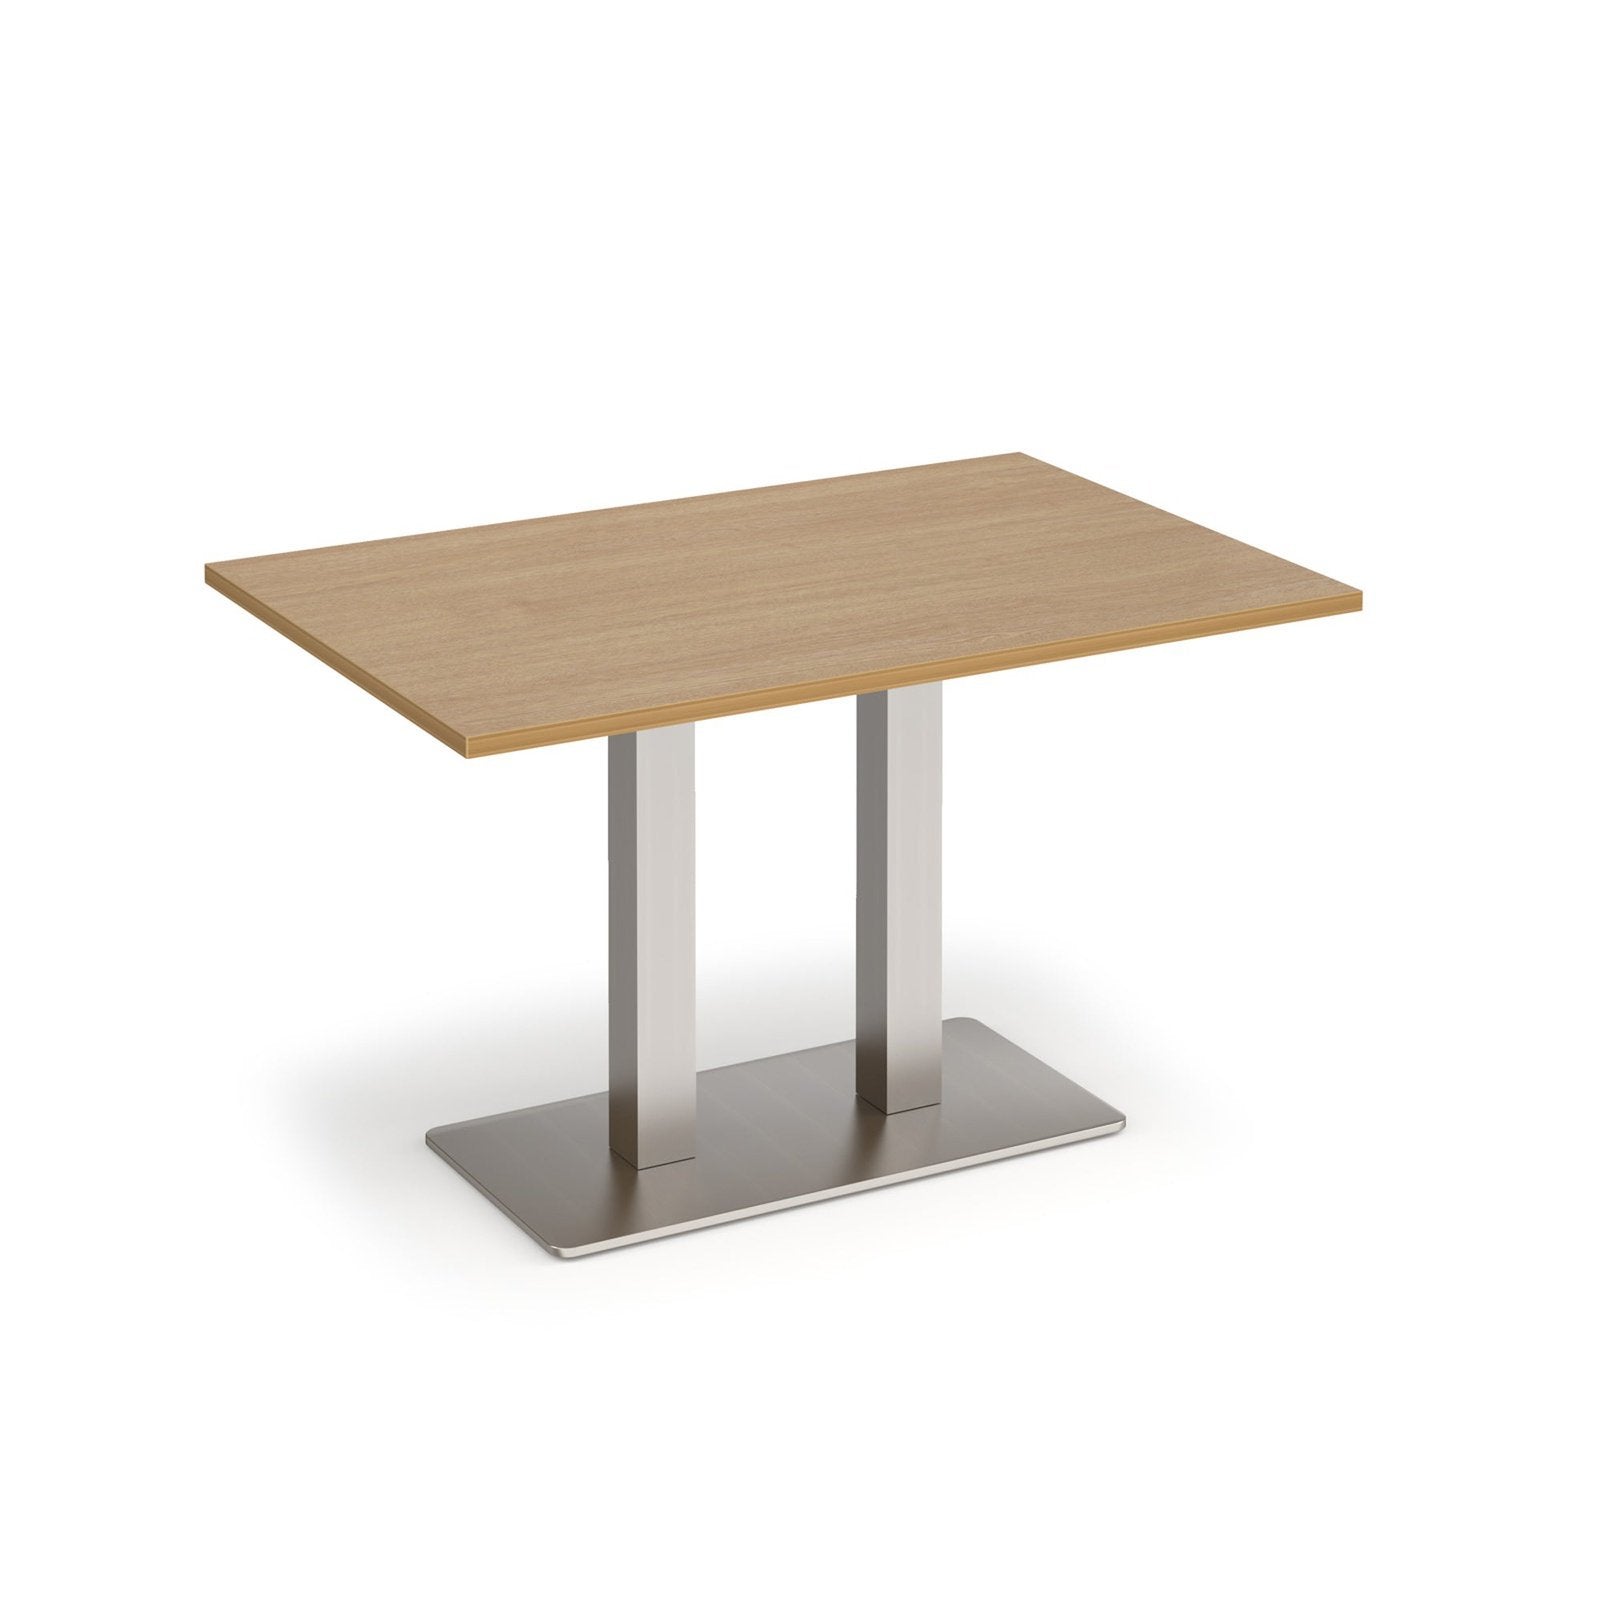 Eros rectangular dining table - Office Products Online